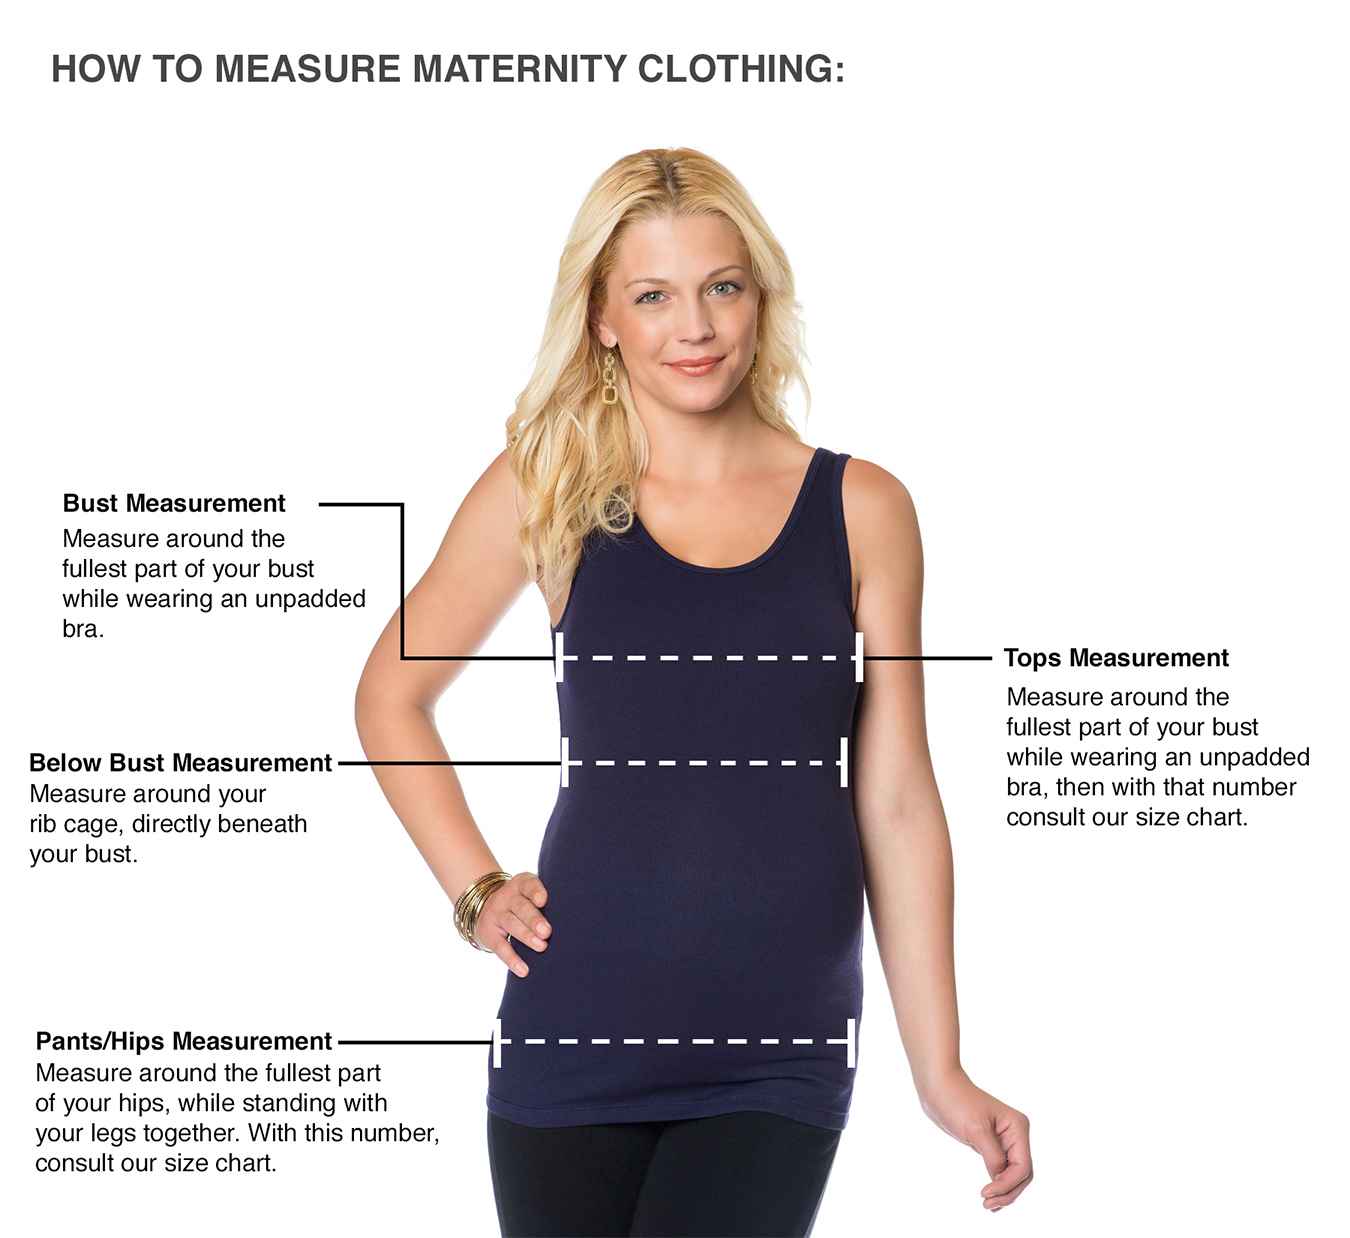 Pregnancy Measurements: How to Size Maternity Clothes | Kohl's